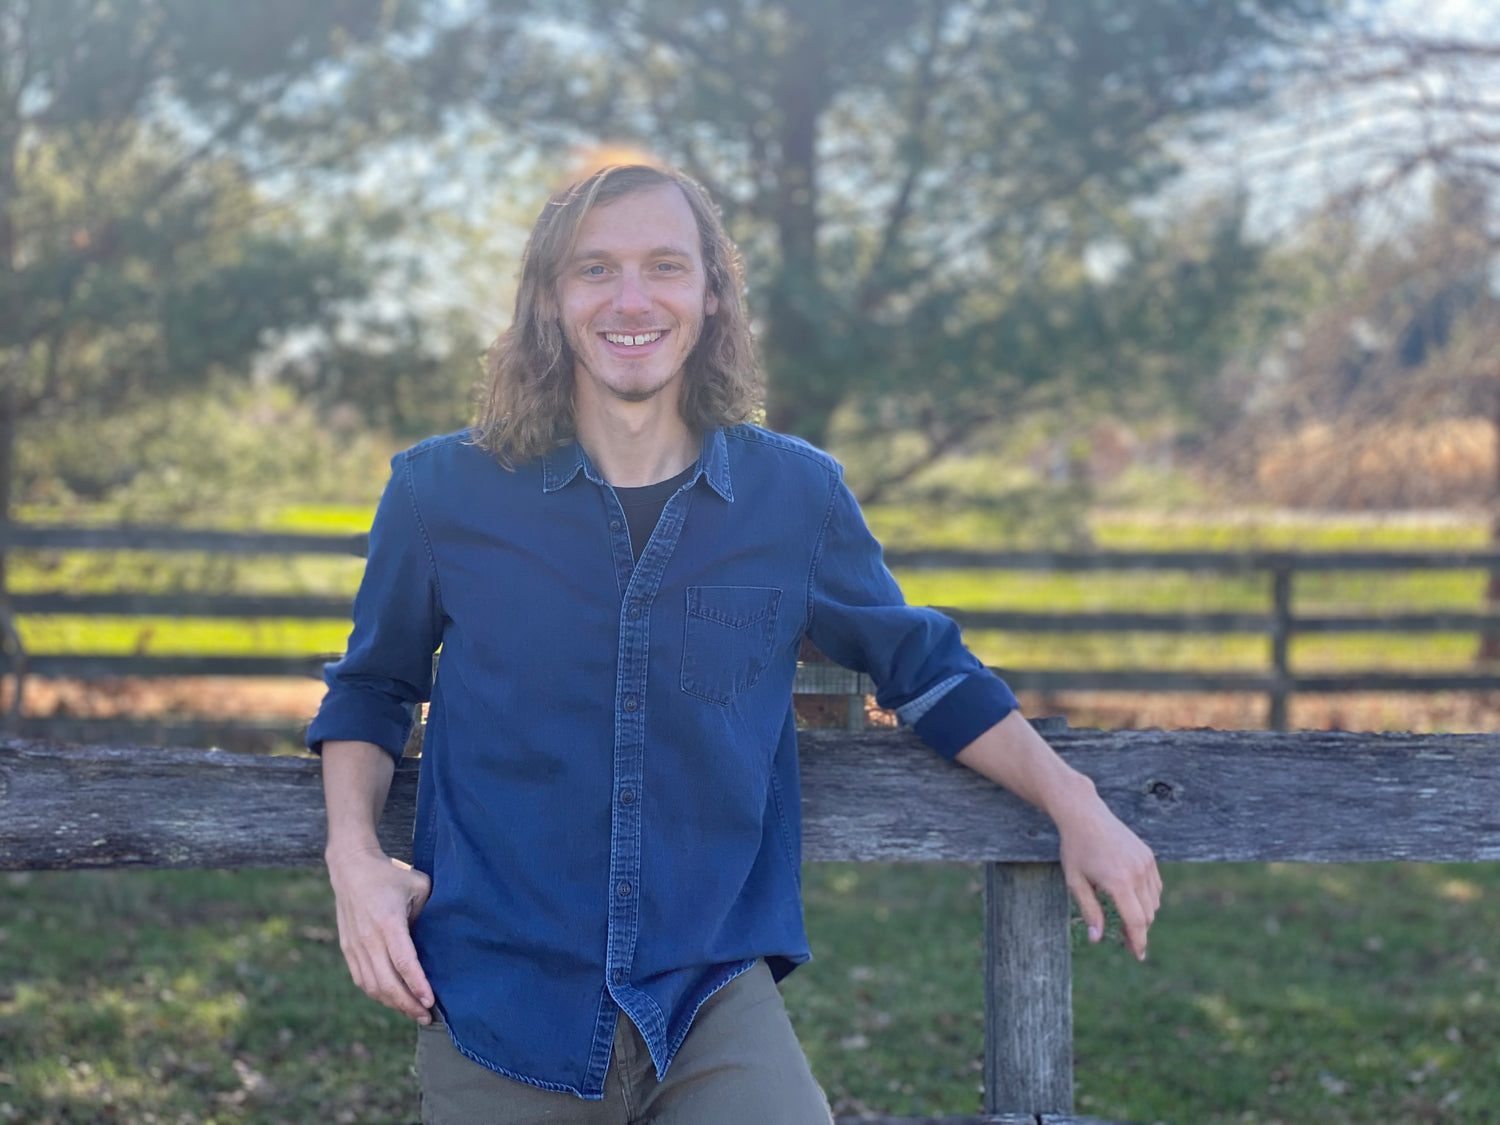 Carpenter Joe Hedglin stands against a wooden fence, casually leaning up against it. He has long, wavy blond hair and is wearing a dark blue button down shirt.